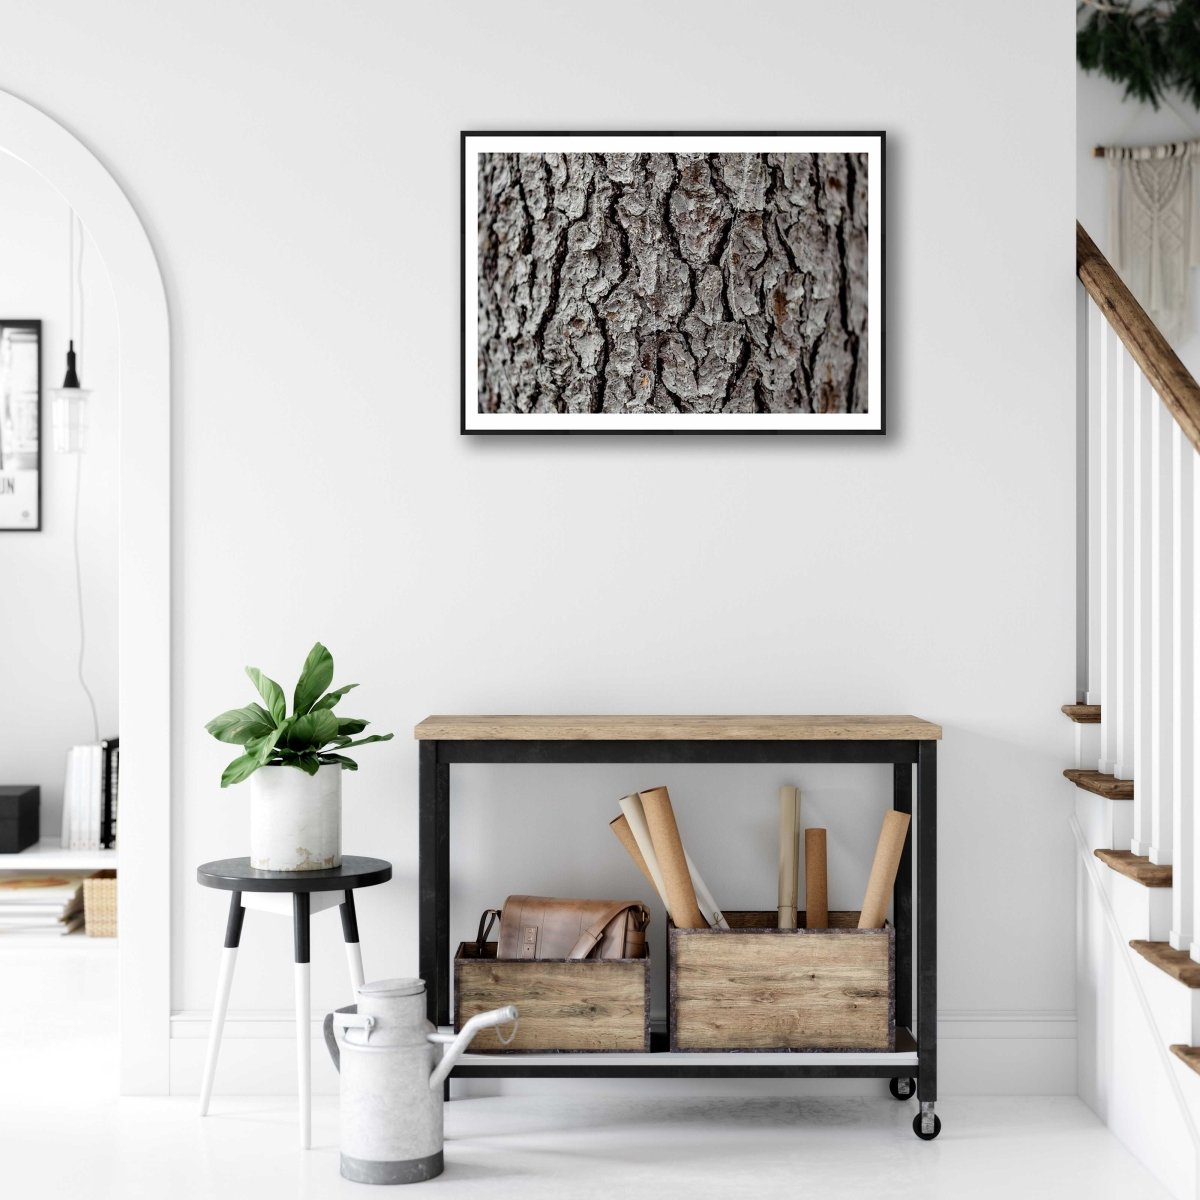 Framed photo of old spruce tree bark close-up, white living room wall.